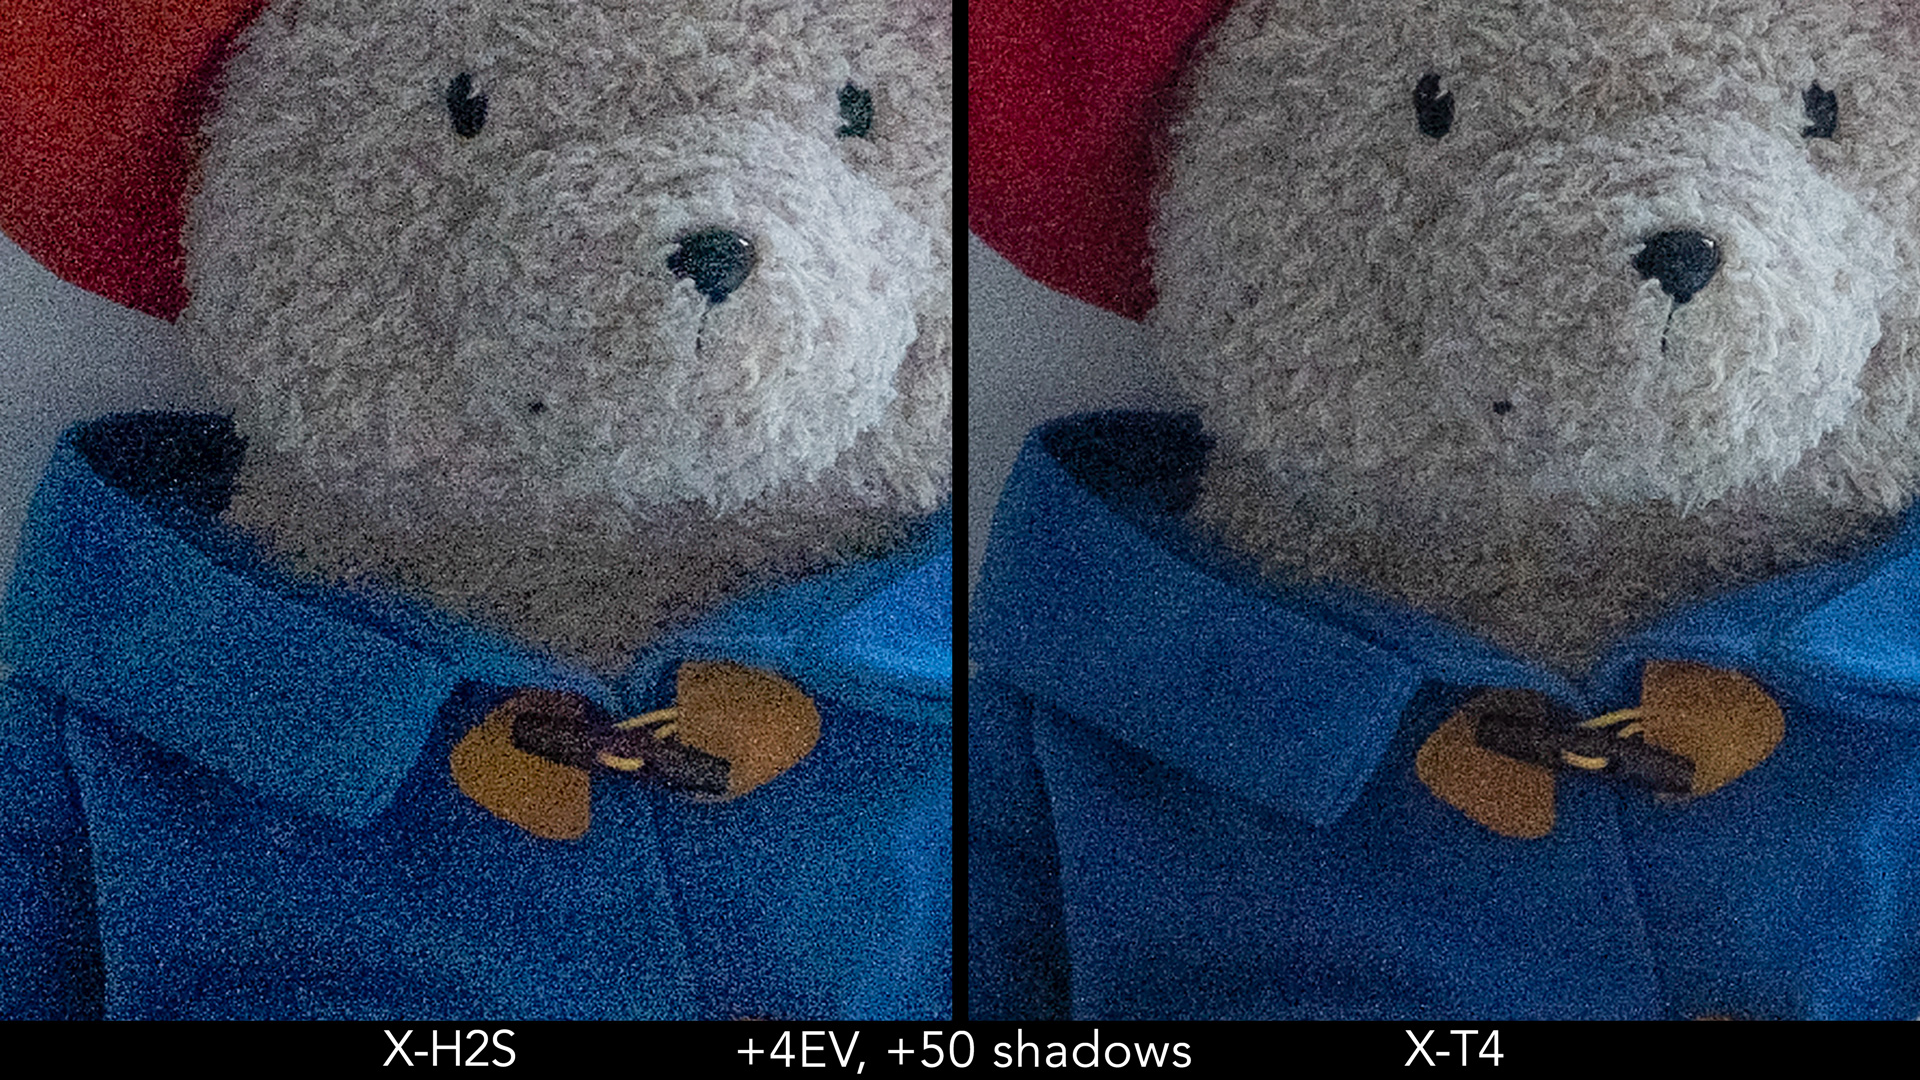 Side by side extreme crop showing the loss of details on the X-H2S image compared to the X-T4.